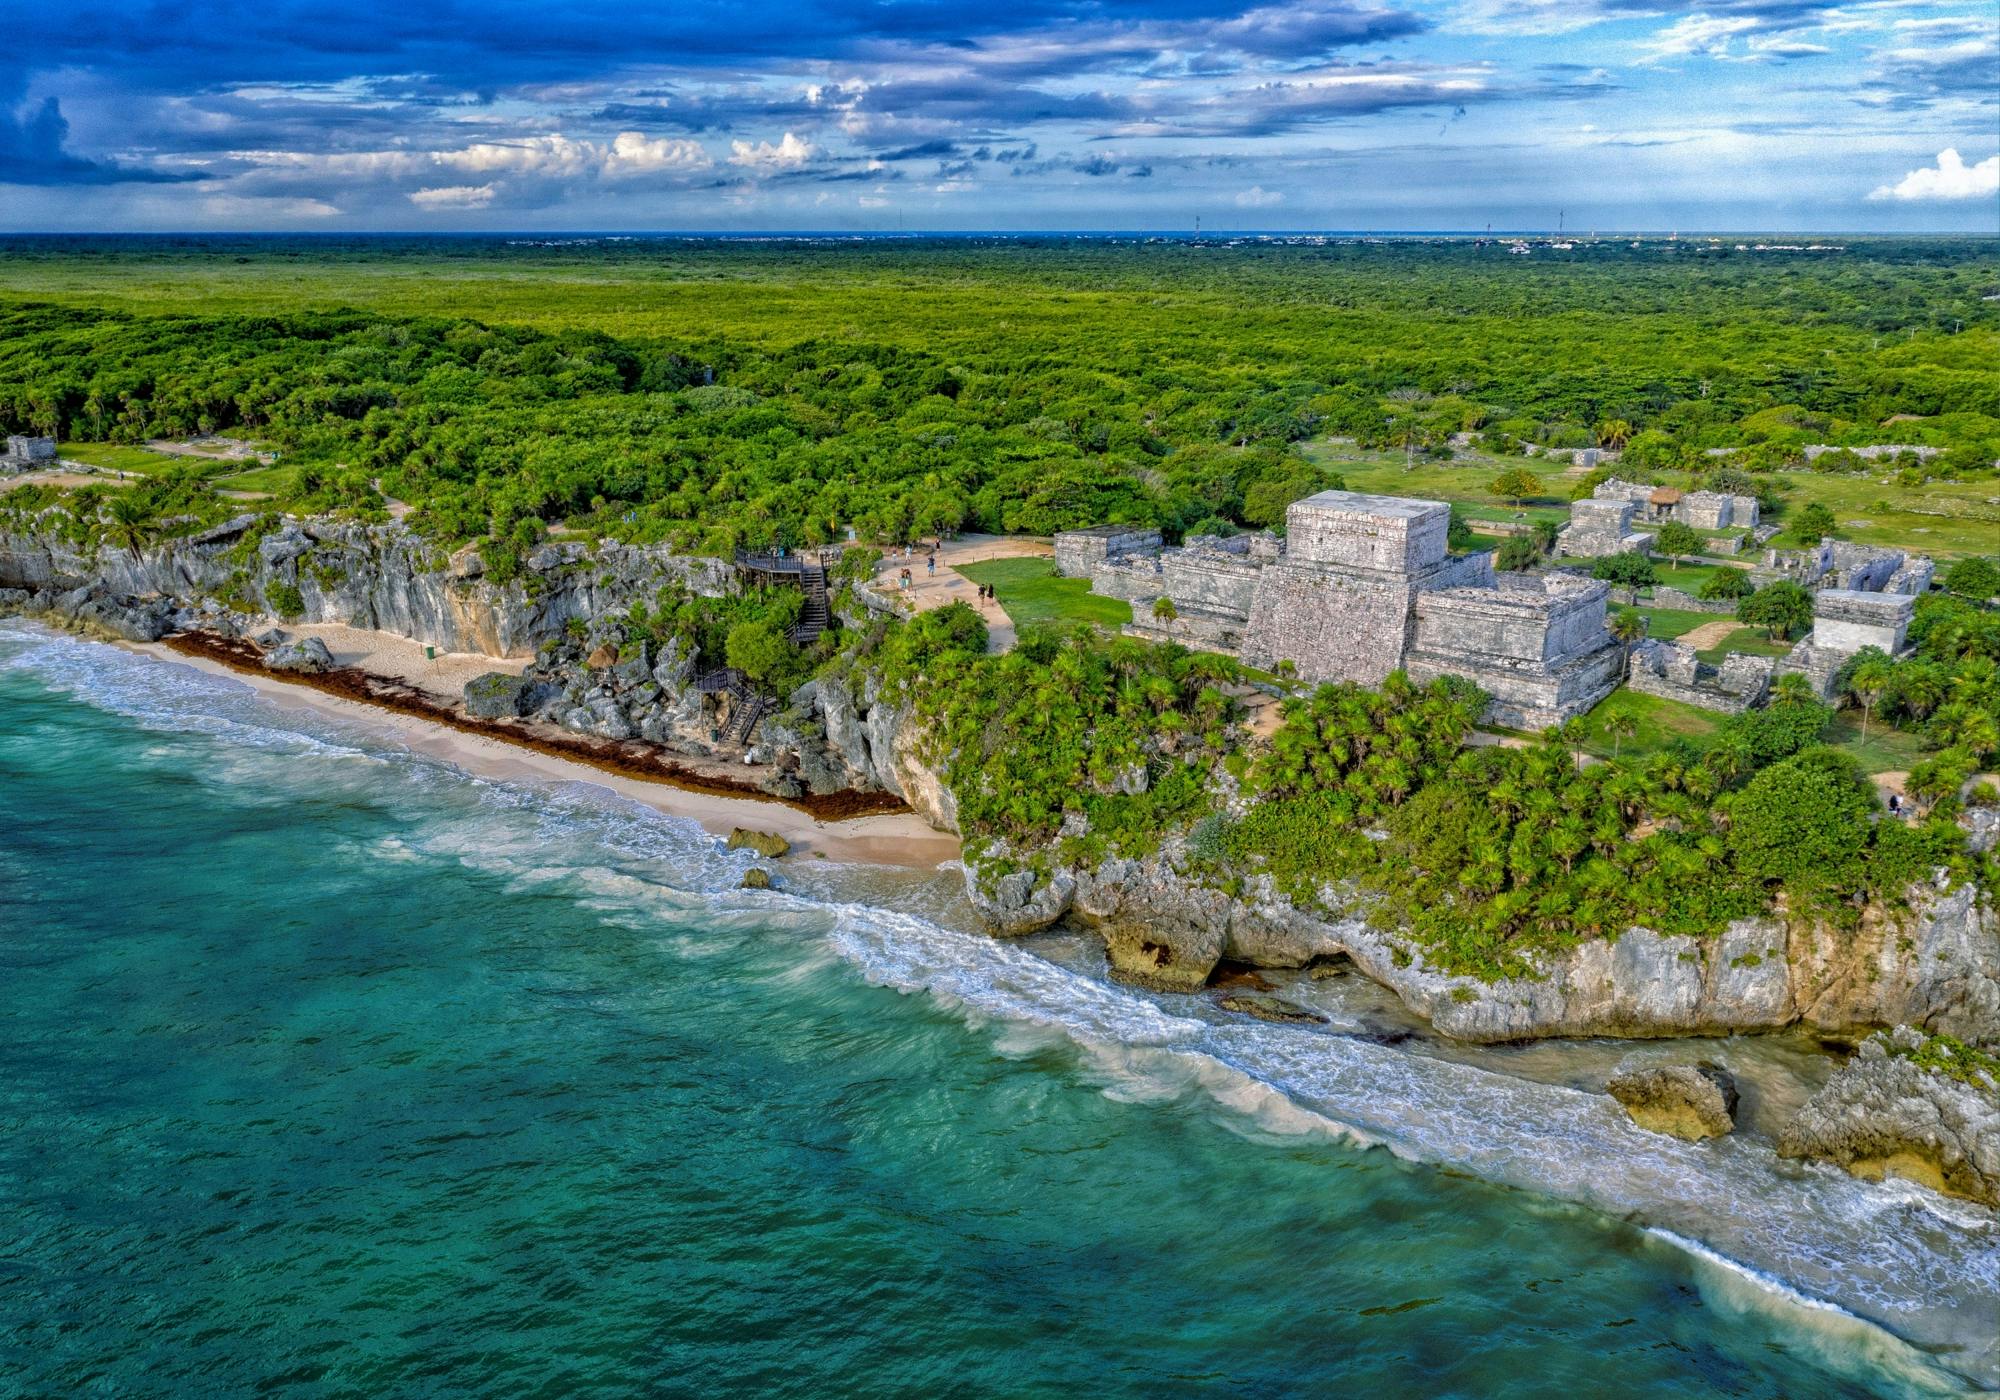 Tulum guided tour with pickup from Cancun and Riviera Maya